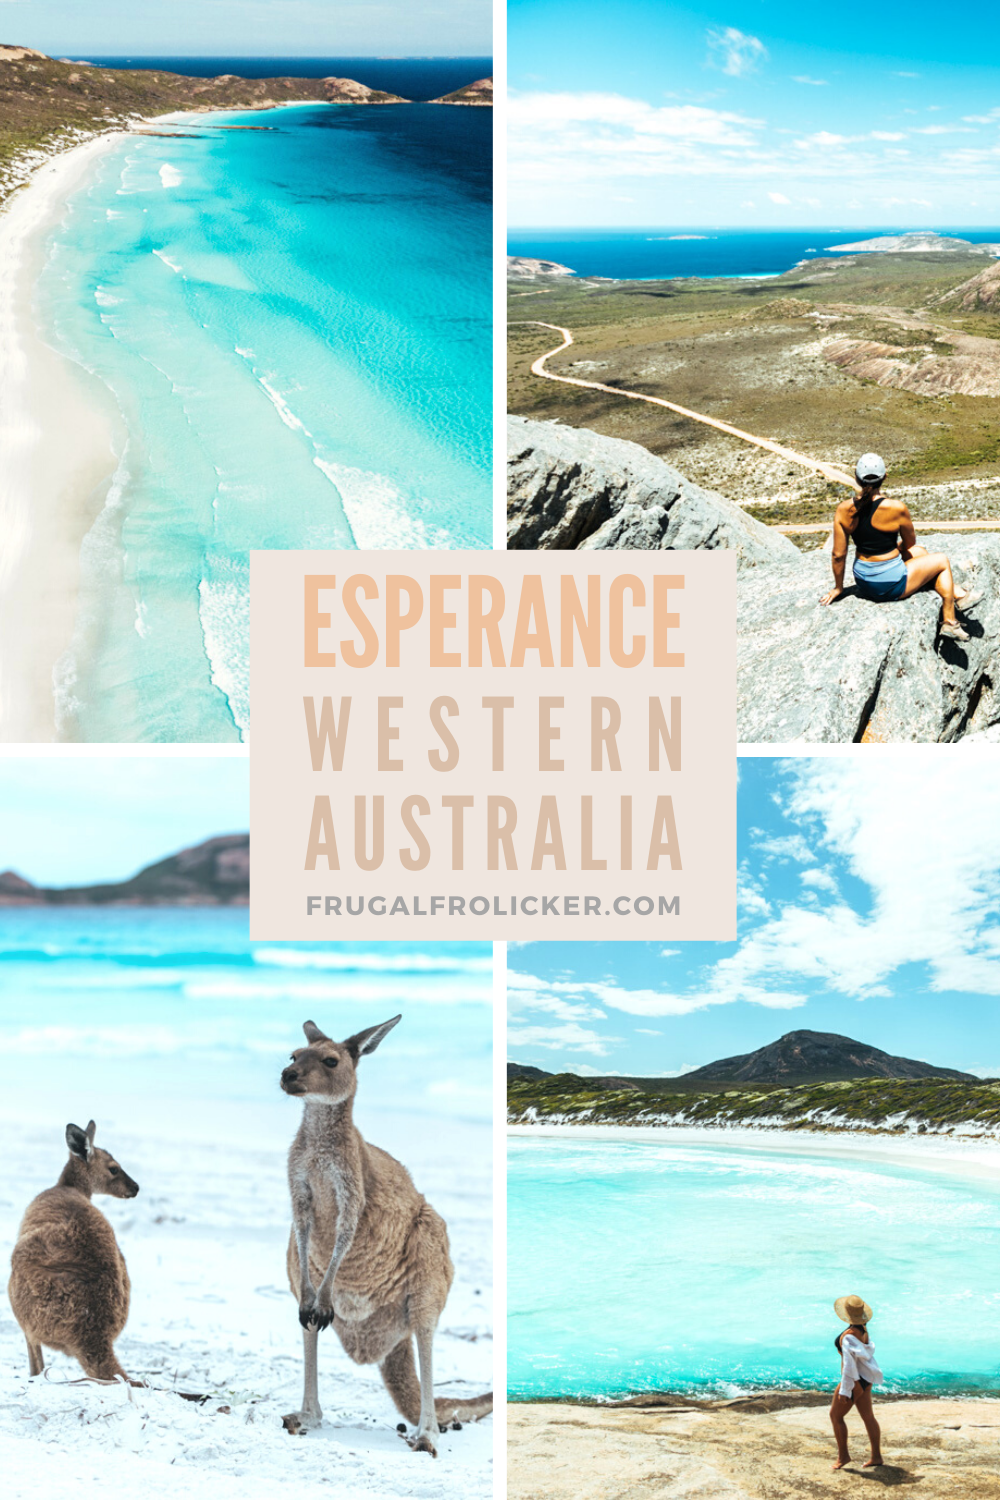 Things to do in Esperance: the best hikes, campsites, and beaches in Esperance